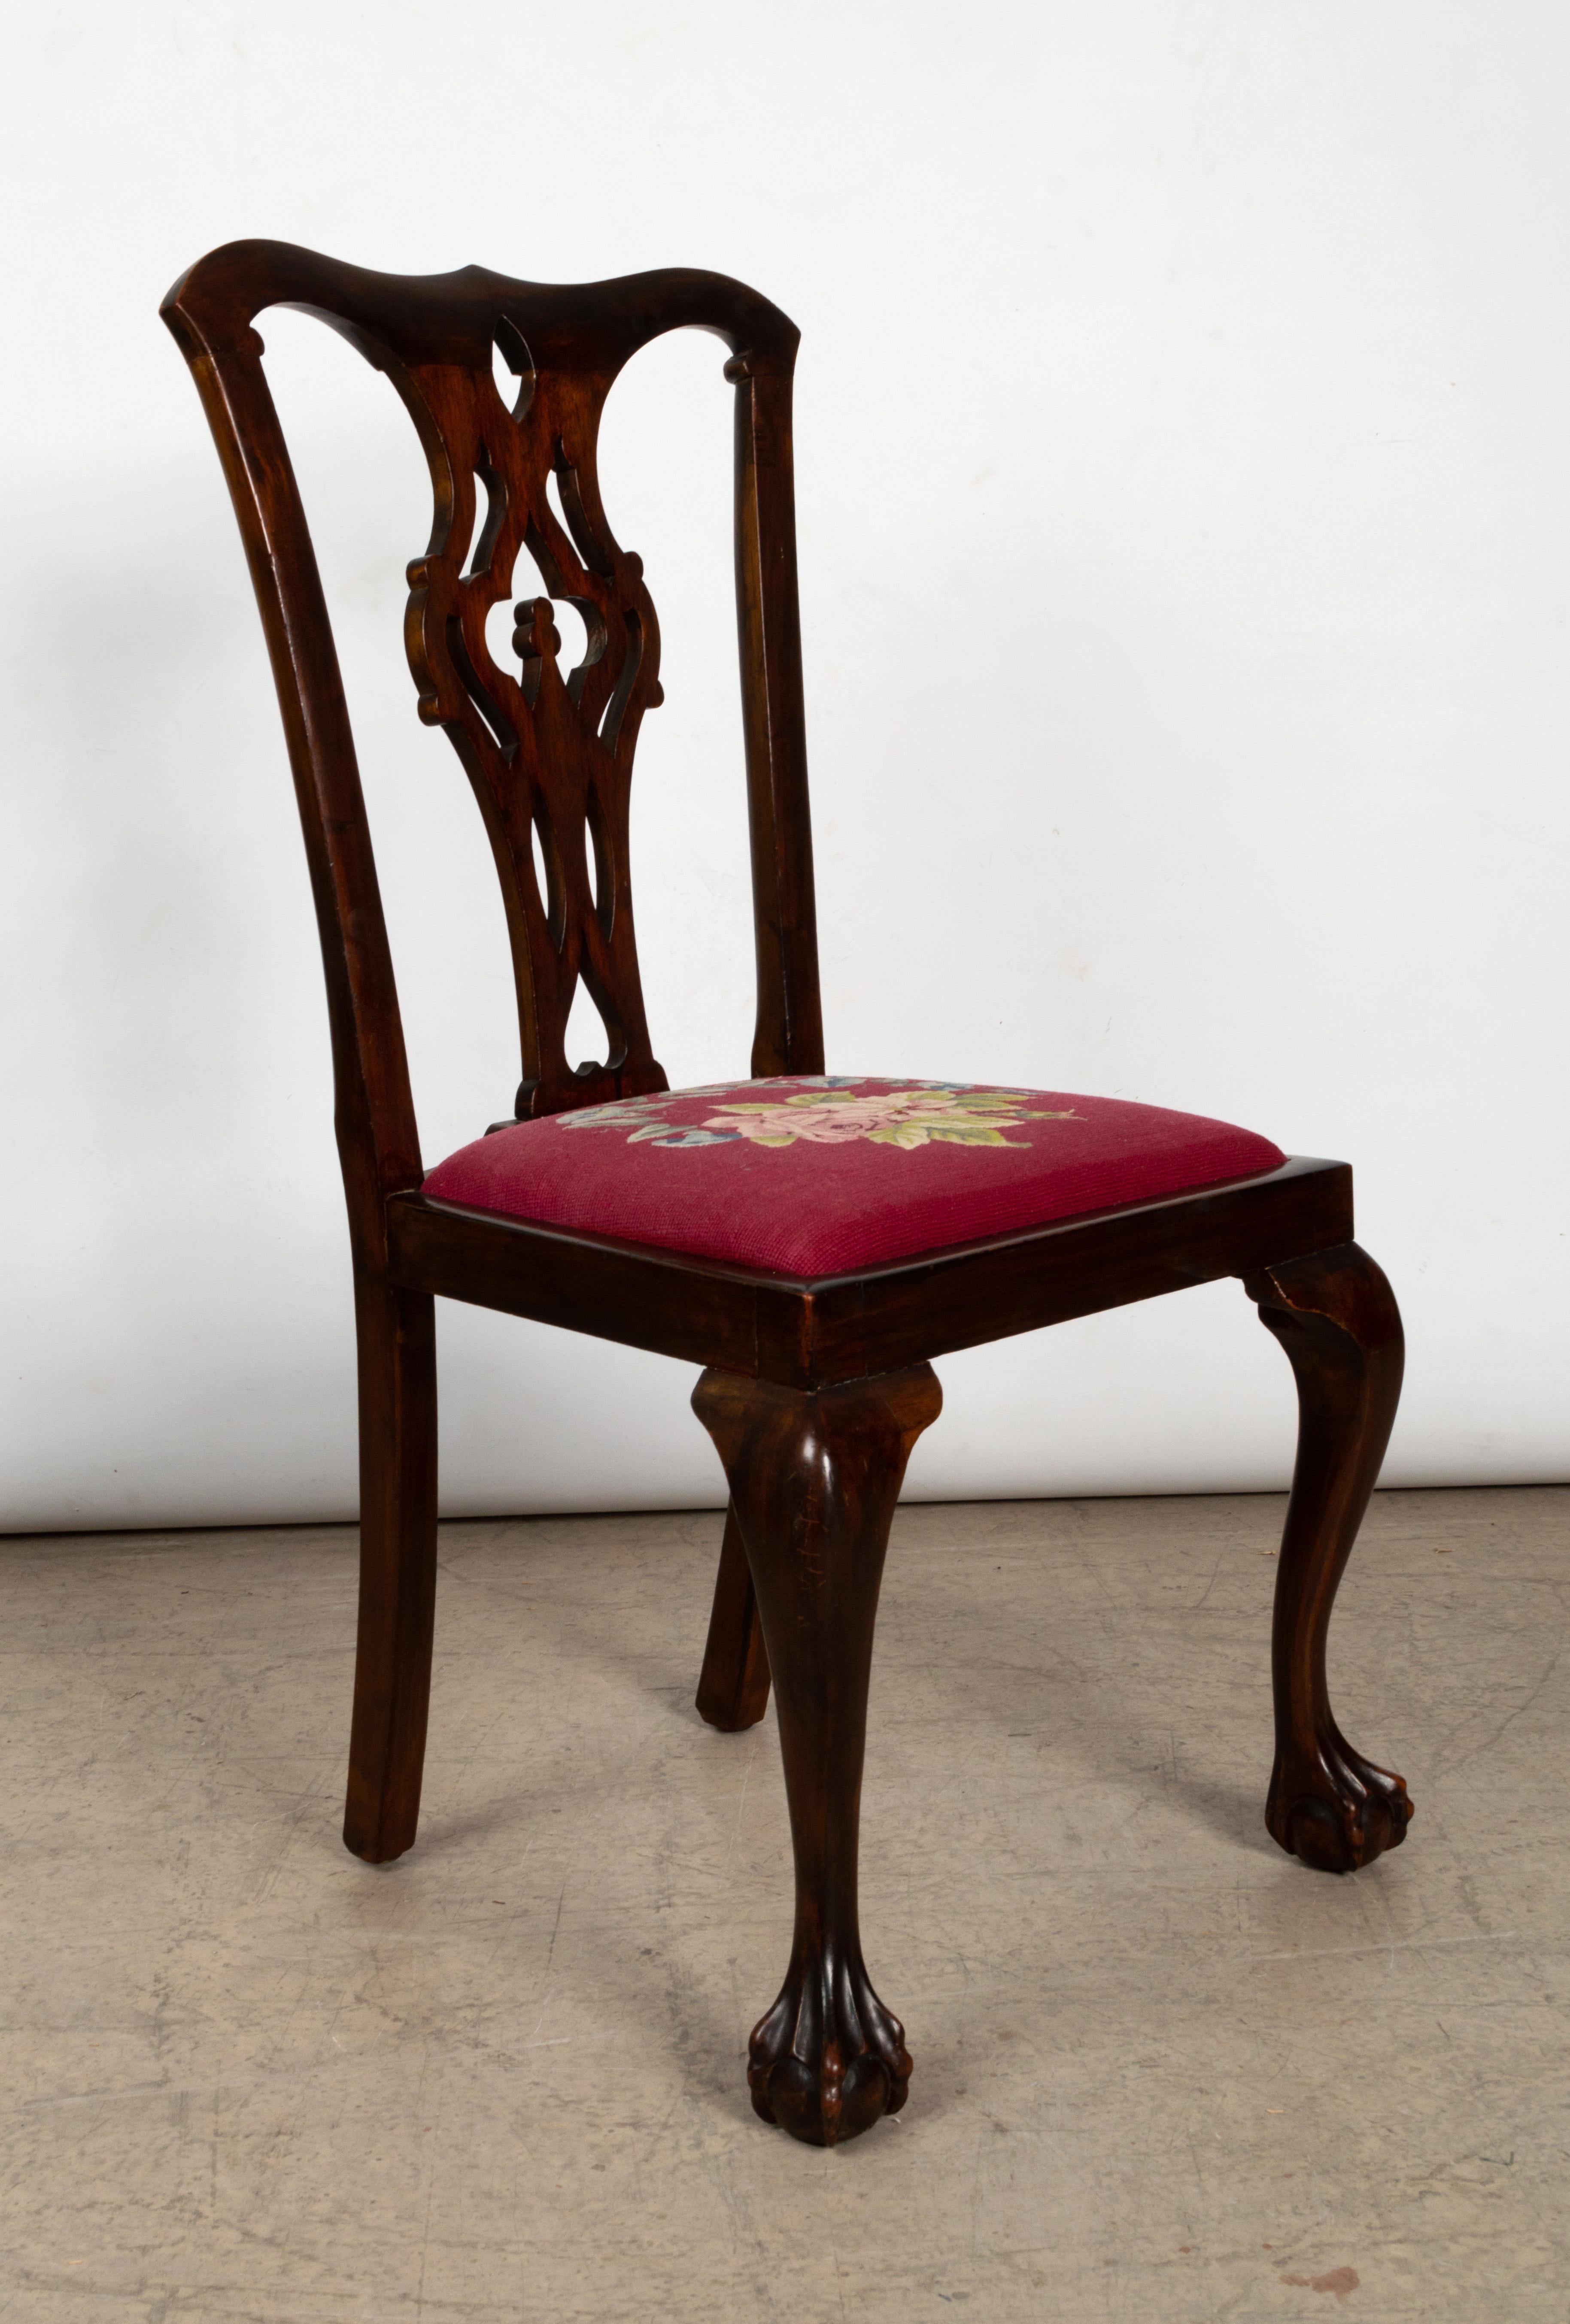 4 Antique English 19th Century Chippendale Revival Mahogany Chairs For Sale 14